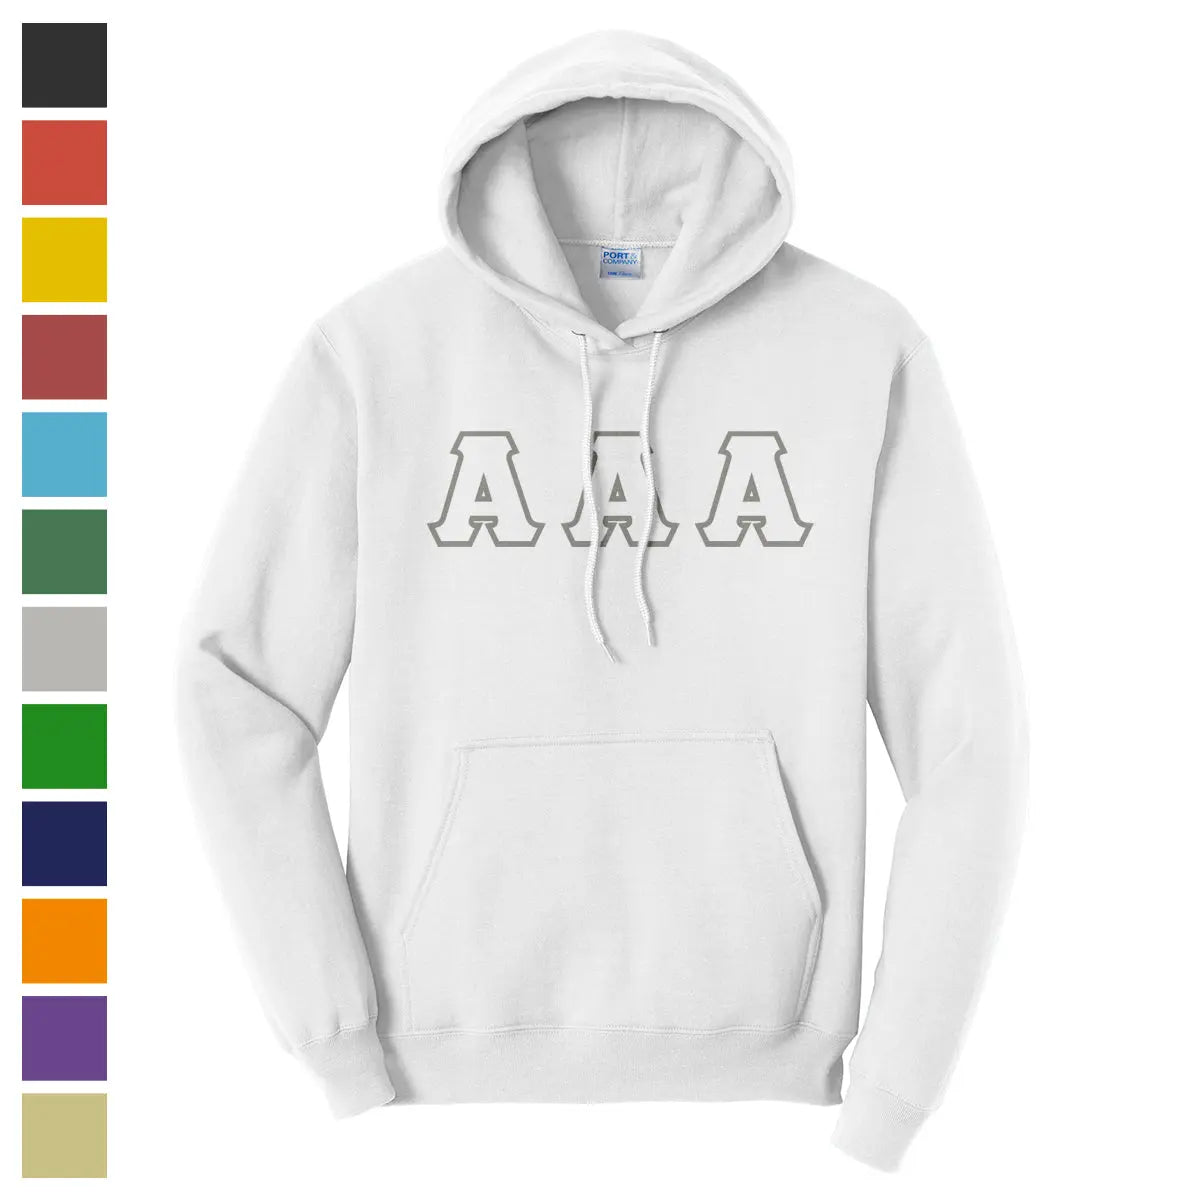 Kappa Sig Pick Your Own Colors Sewn On Hoodie - Kappa Sigma Official Store